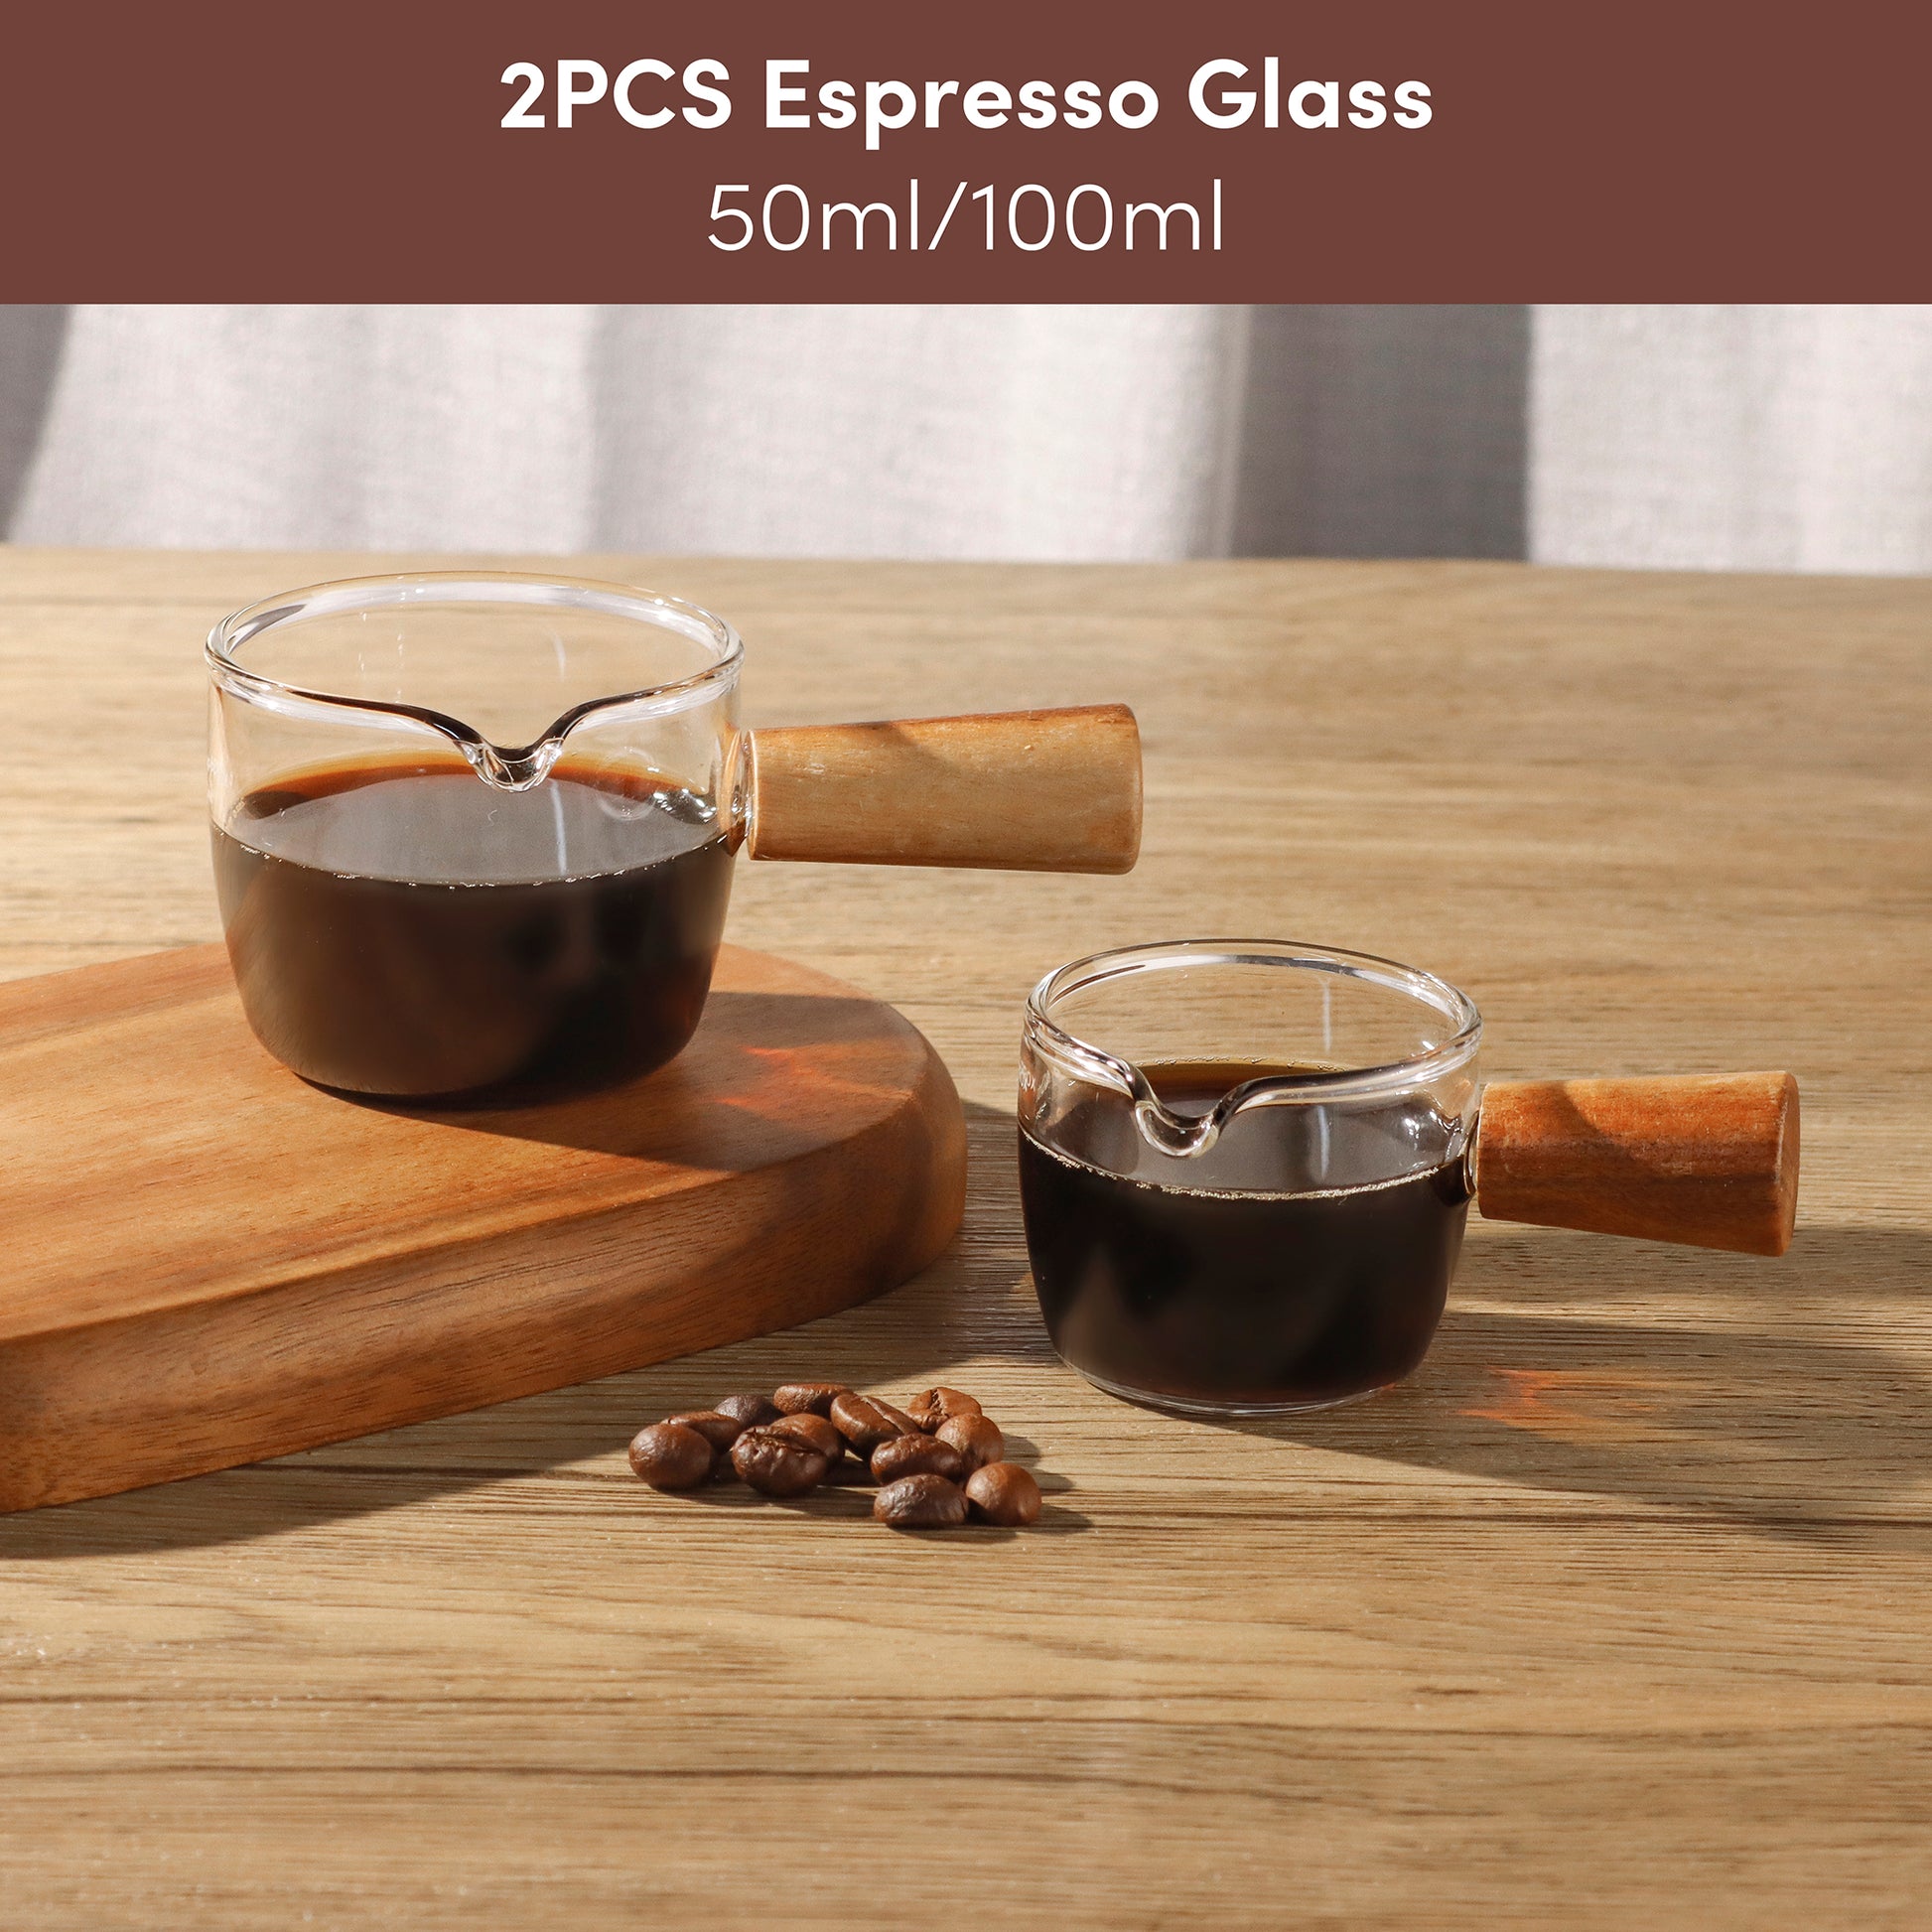 Single / Double Spouts Measuring Cup with Wooden Handle, Milk Cup Pitcher  Heat Resistant Glass 75ML Espresso Shot Glasses for Barista